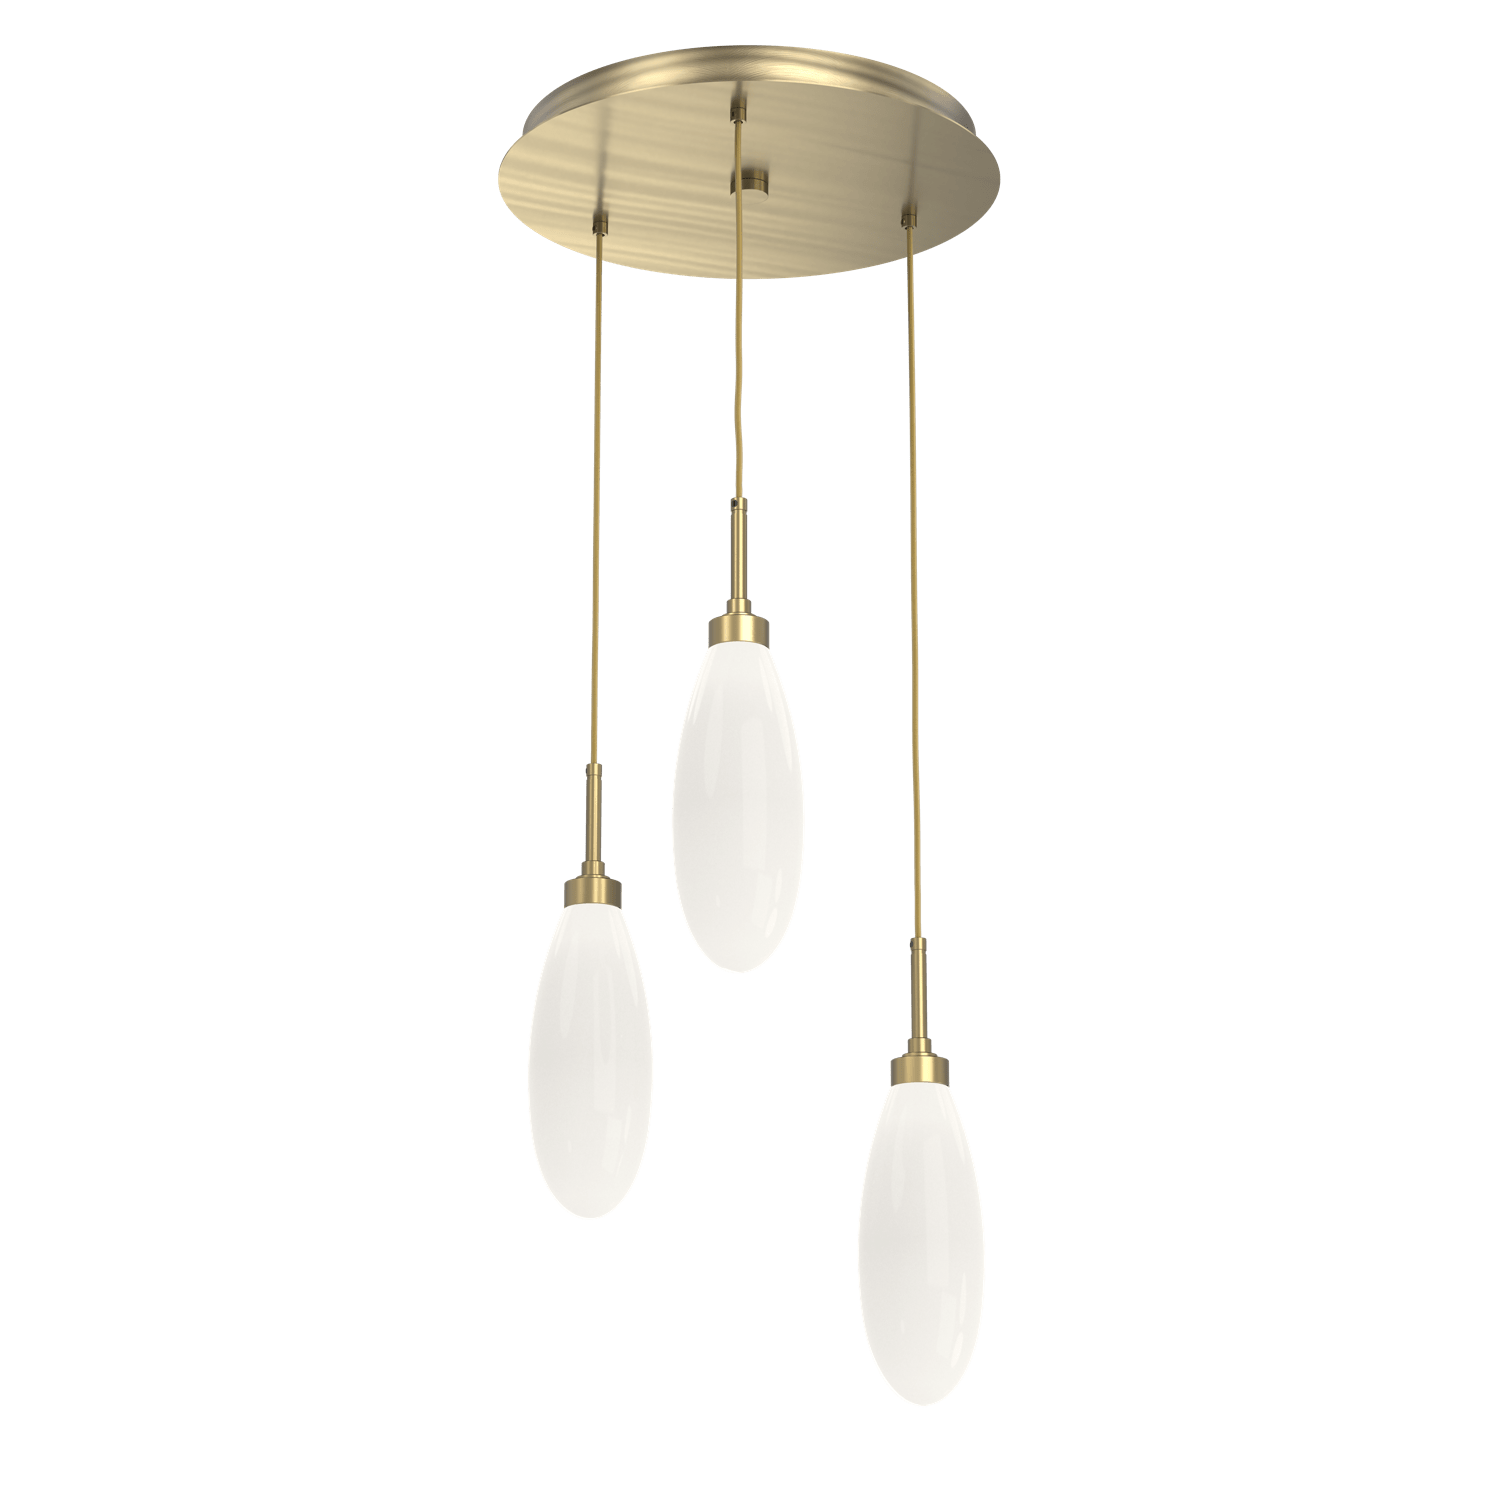 CHB0071-03-HB-WL-LL-Hammerton-Studio-Fiori-3-light-round-pendant-chandelier-with-heritage-brass-finish-and-opal-white-glass-shades-and-LED-lamping